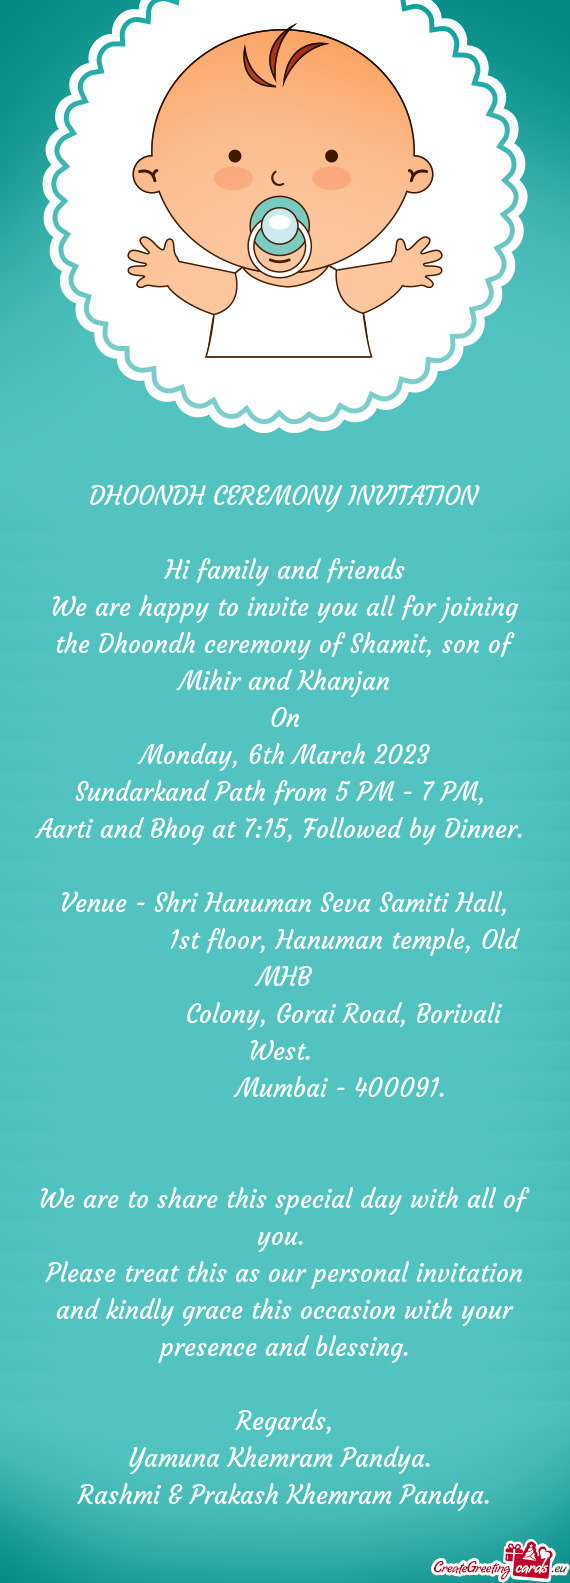 We are happy to invite you all for joining the Dhoondh ceremony of Shamit, son of Mihir and Khanjan